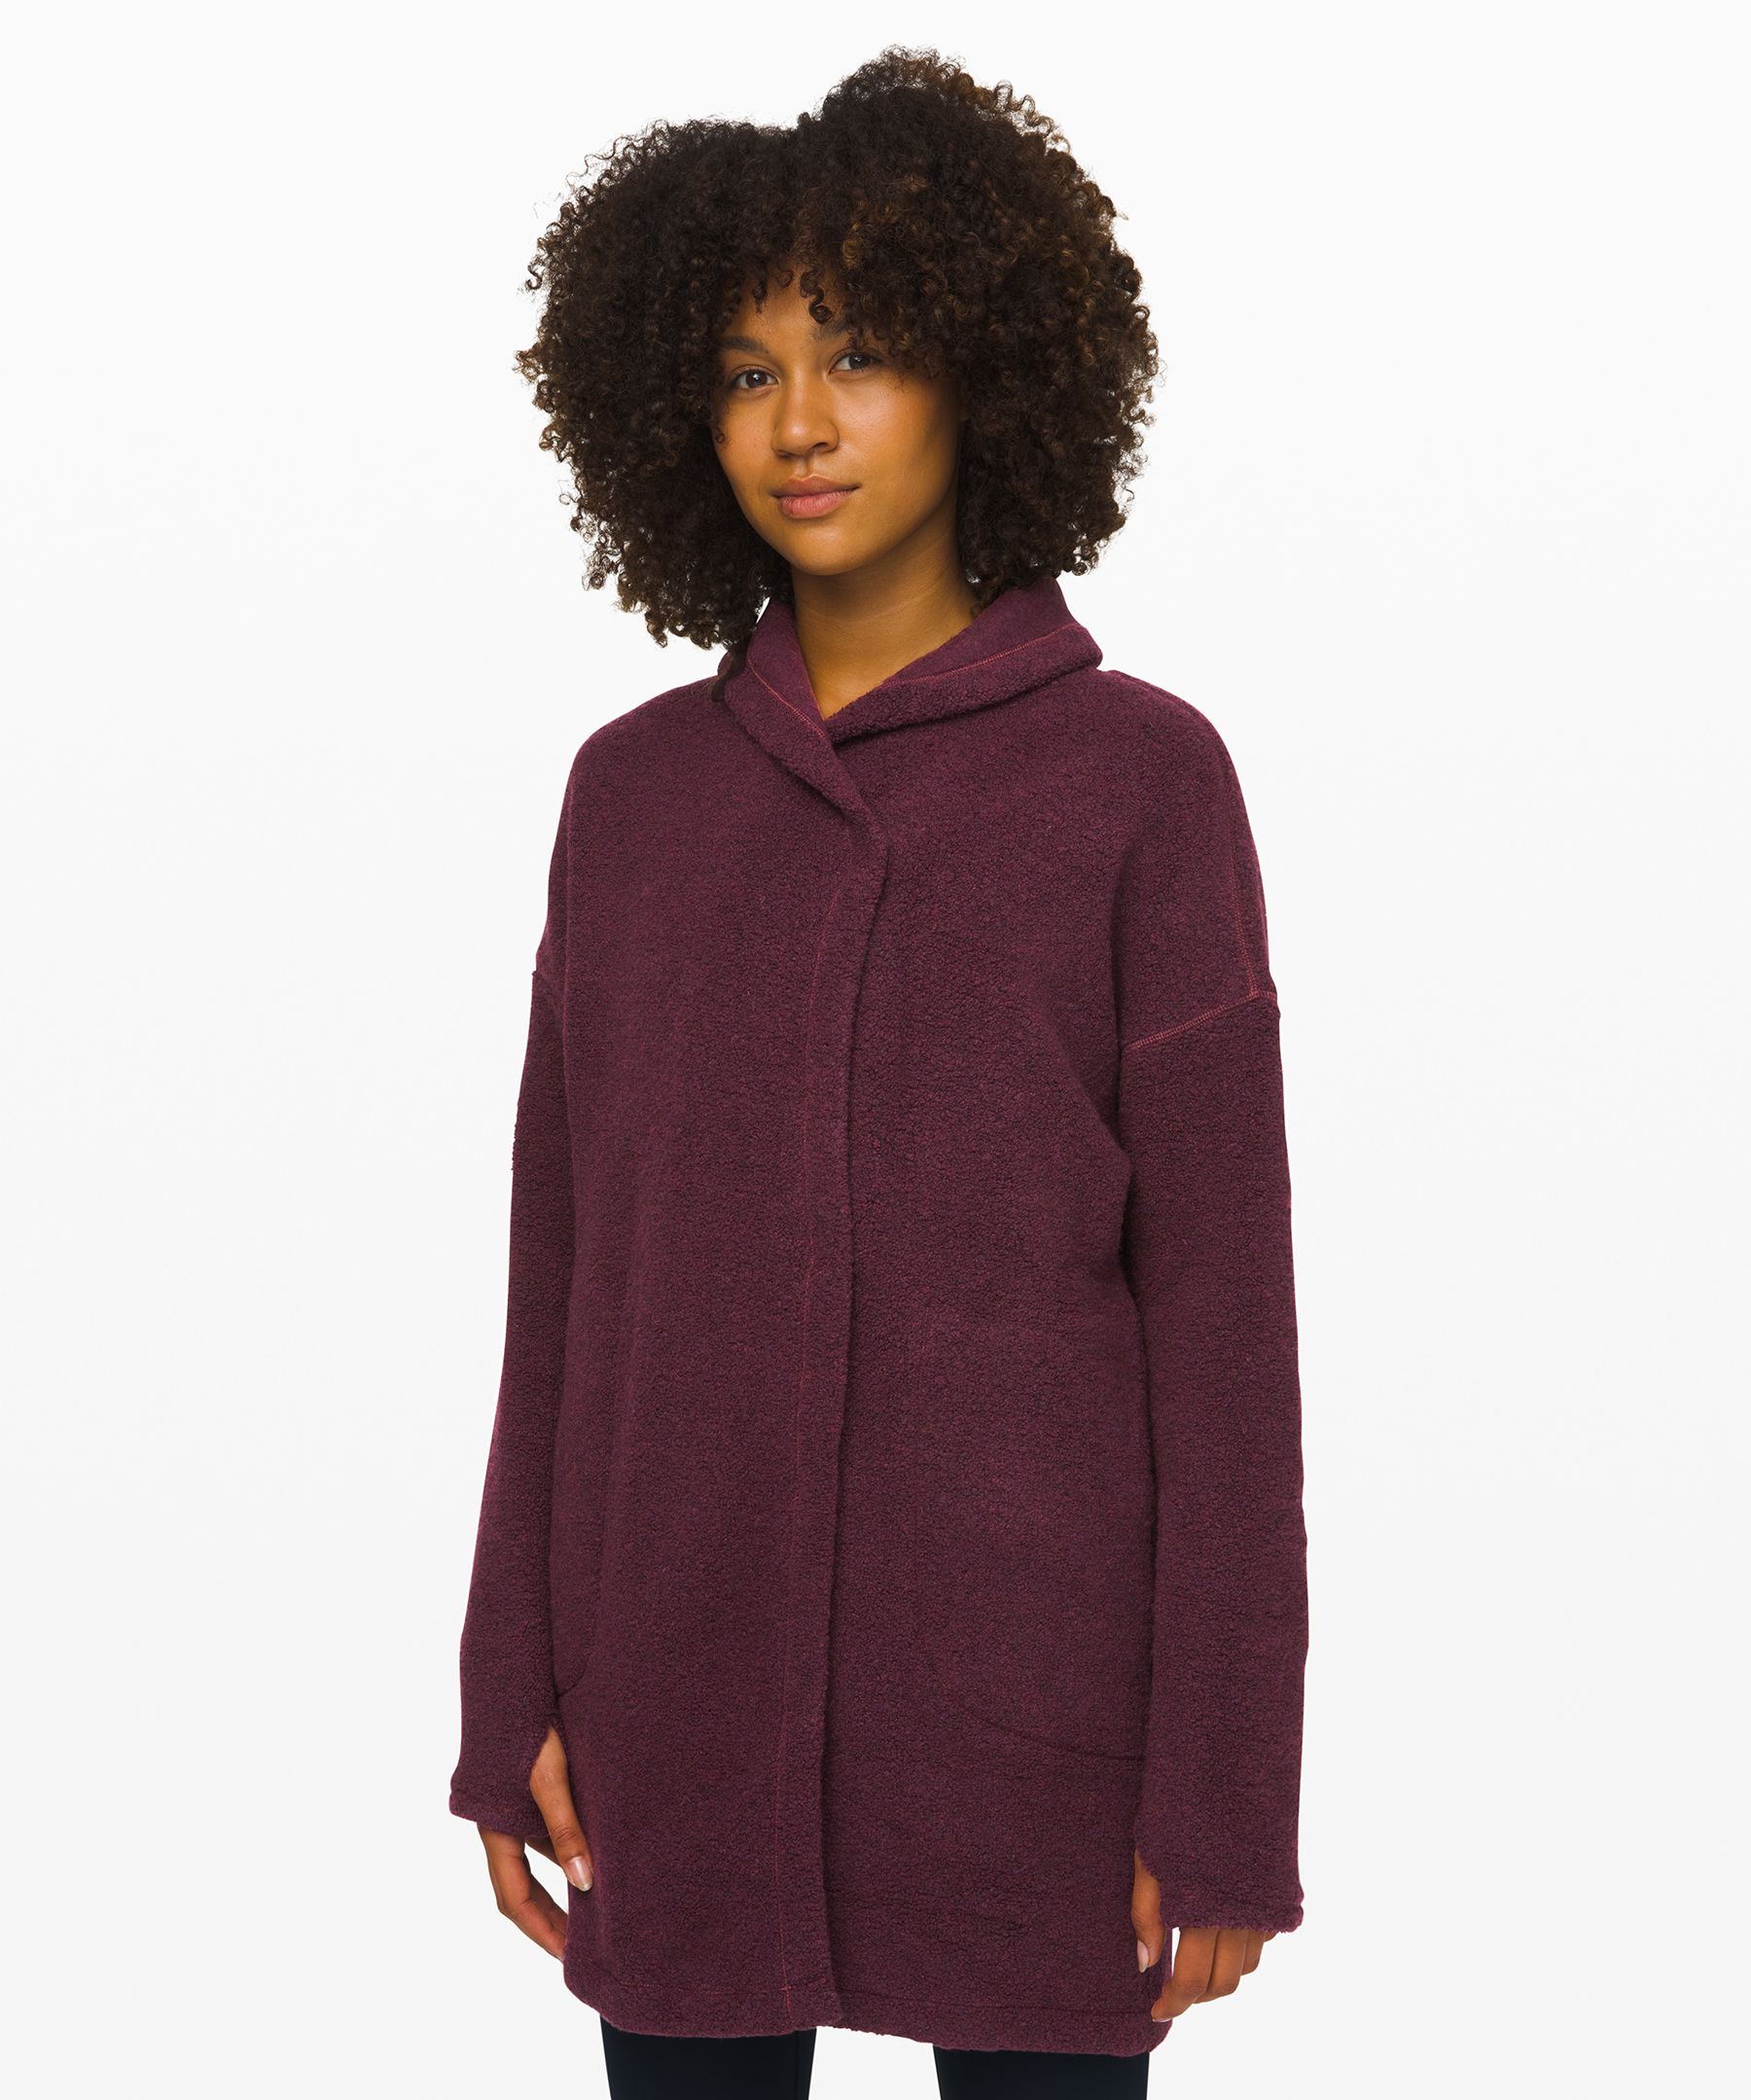 Lululemon Sincerely Sherpa Wrap In Heathered Arctic Plum